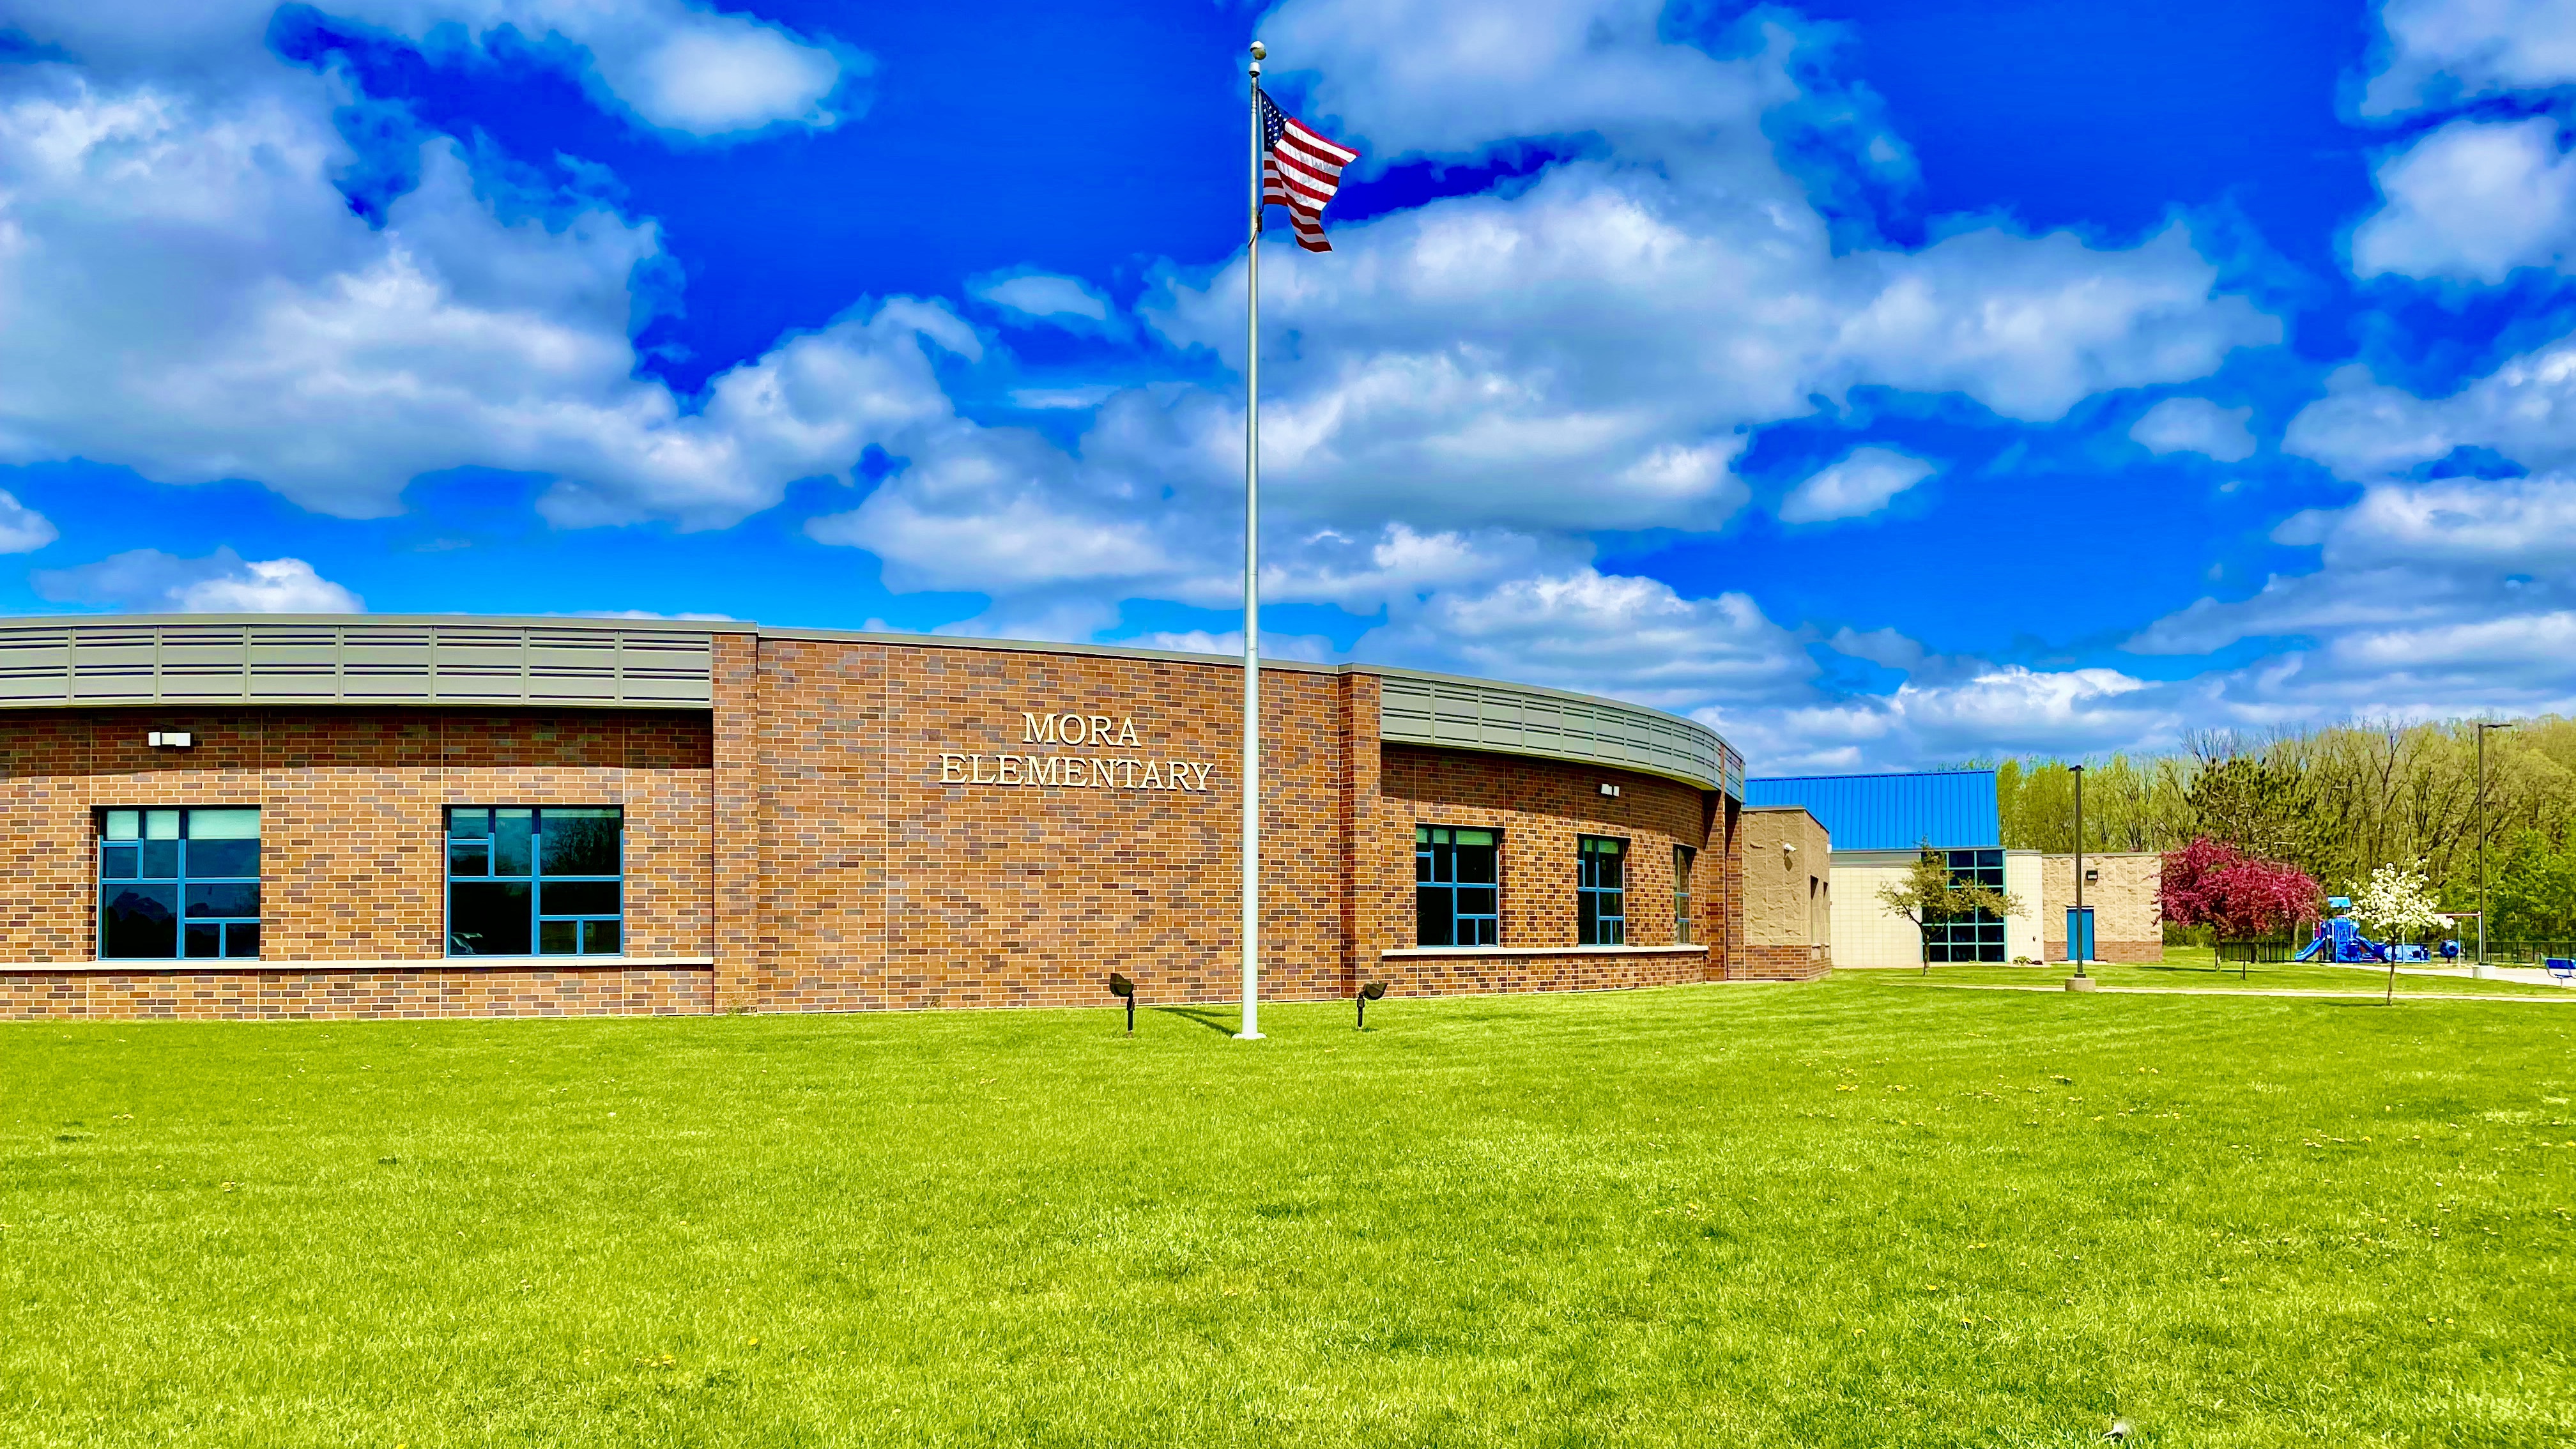 Photo of school outside looking at Flag pole bright blue sky with green grass